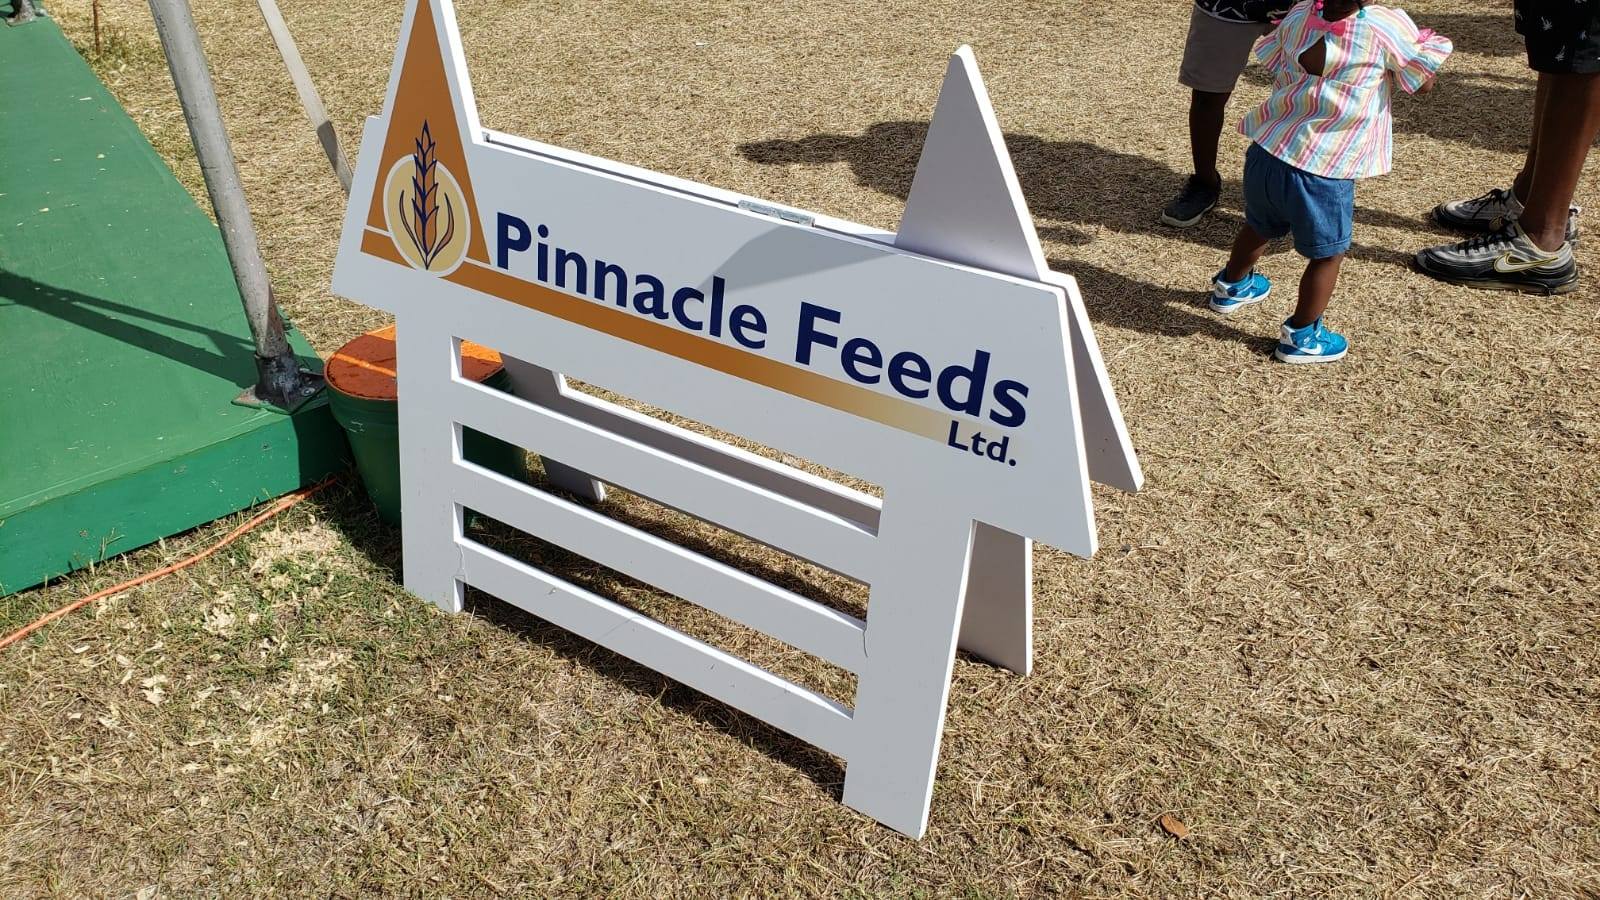 Pinnacle Feeds remains committed to best outcome for farmers, employees and the wider public